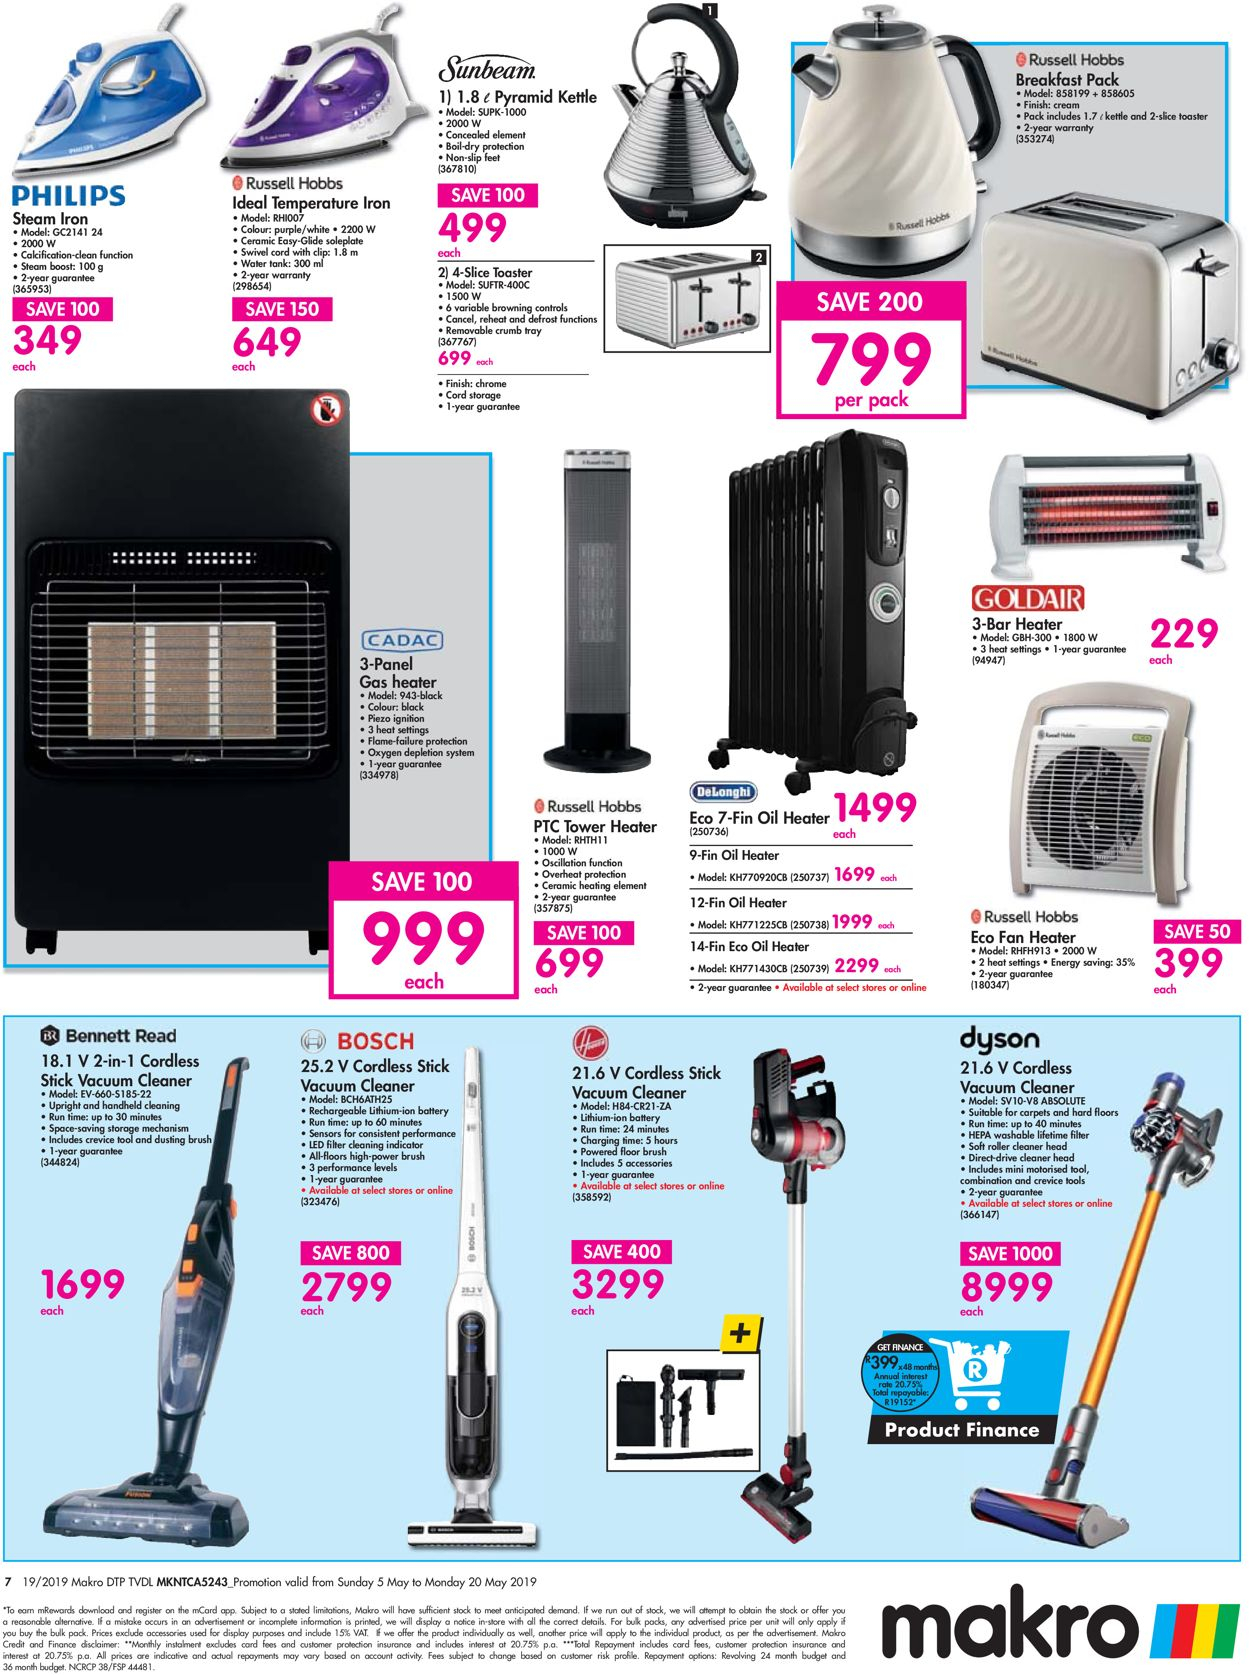 Makro Current Catalogue 20190505 20190520 7 Za pertaining to dimensions 1250 X 1675